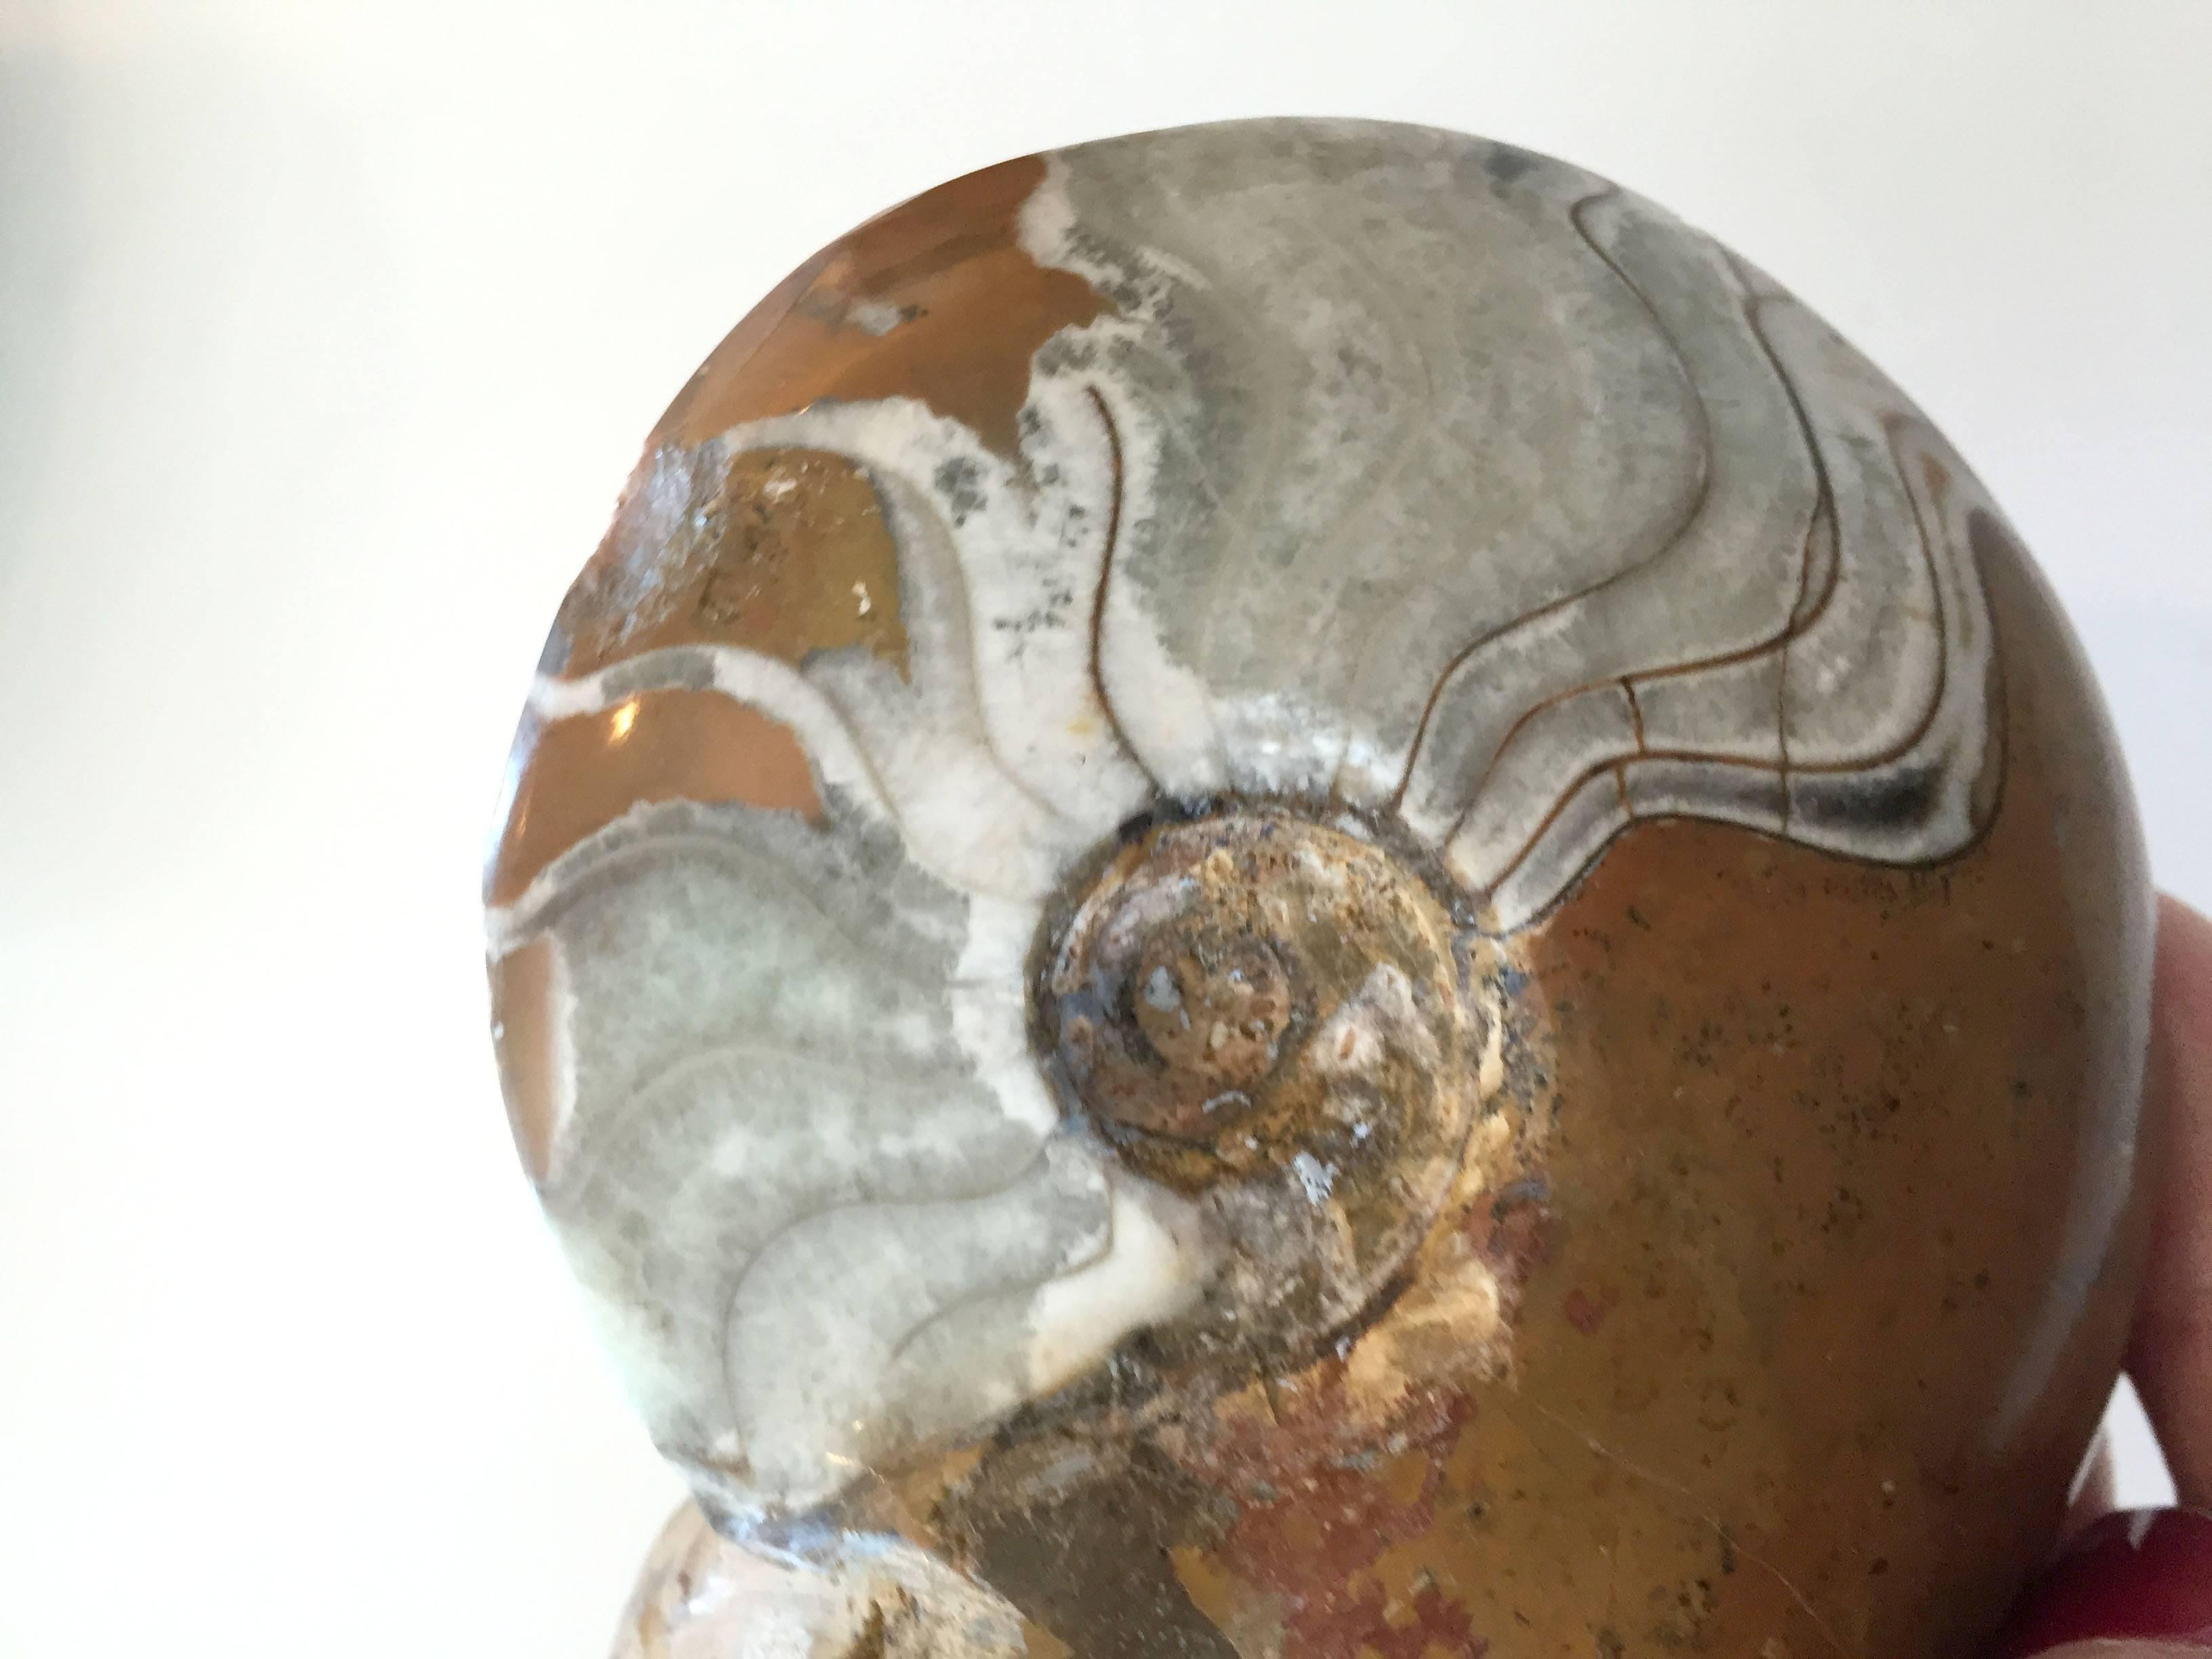 Egyptian Two Million Year Old Ammonites of a Nautilus and Crustacean